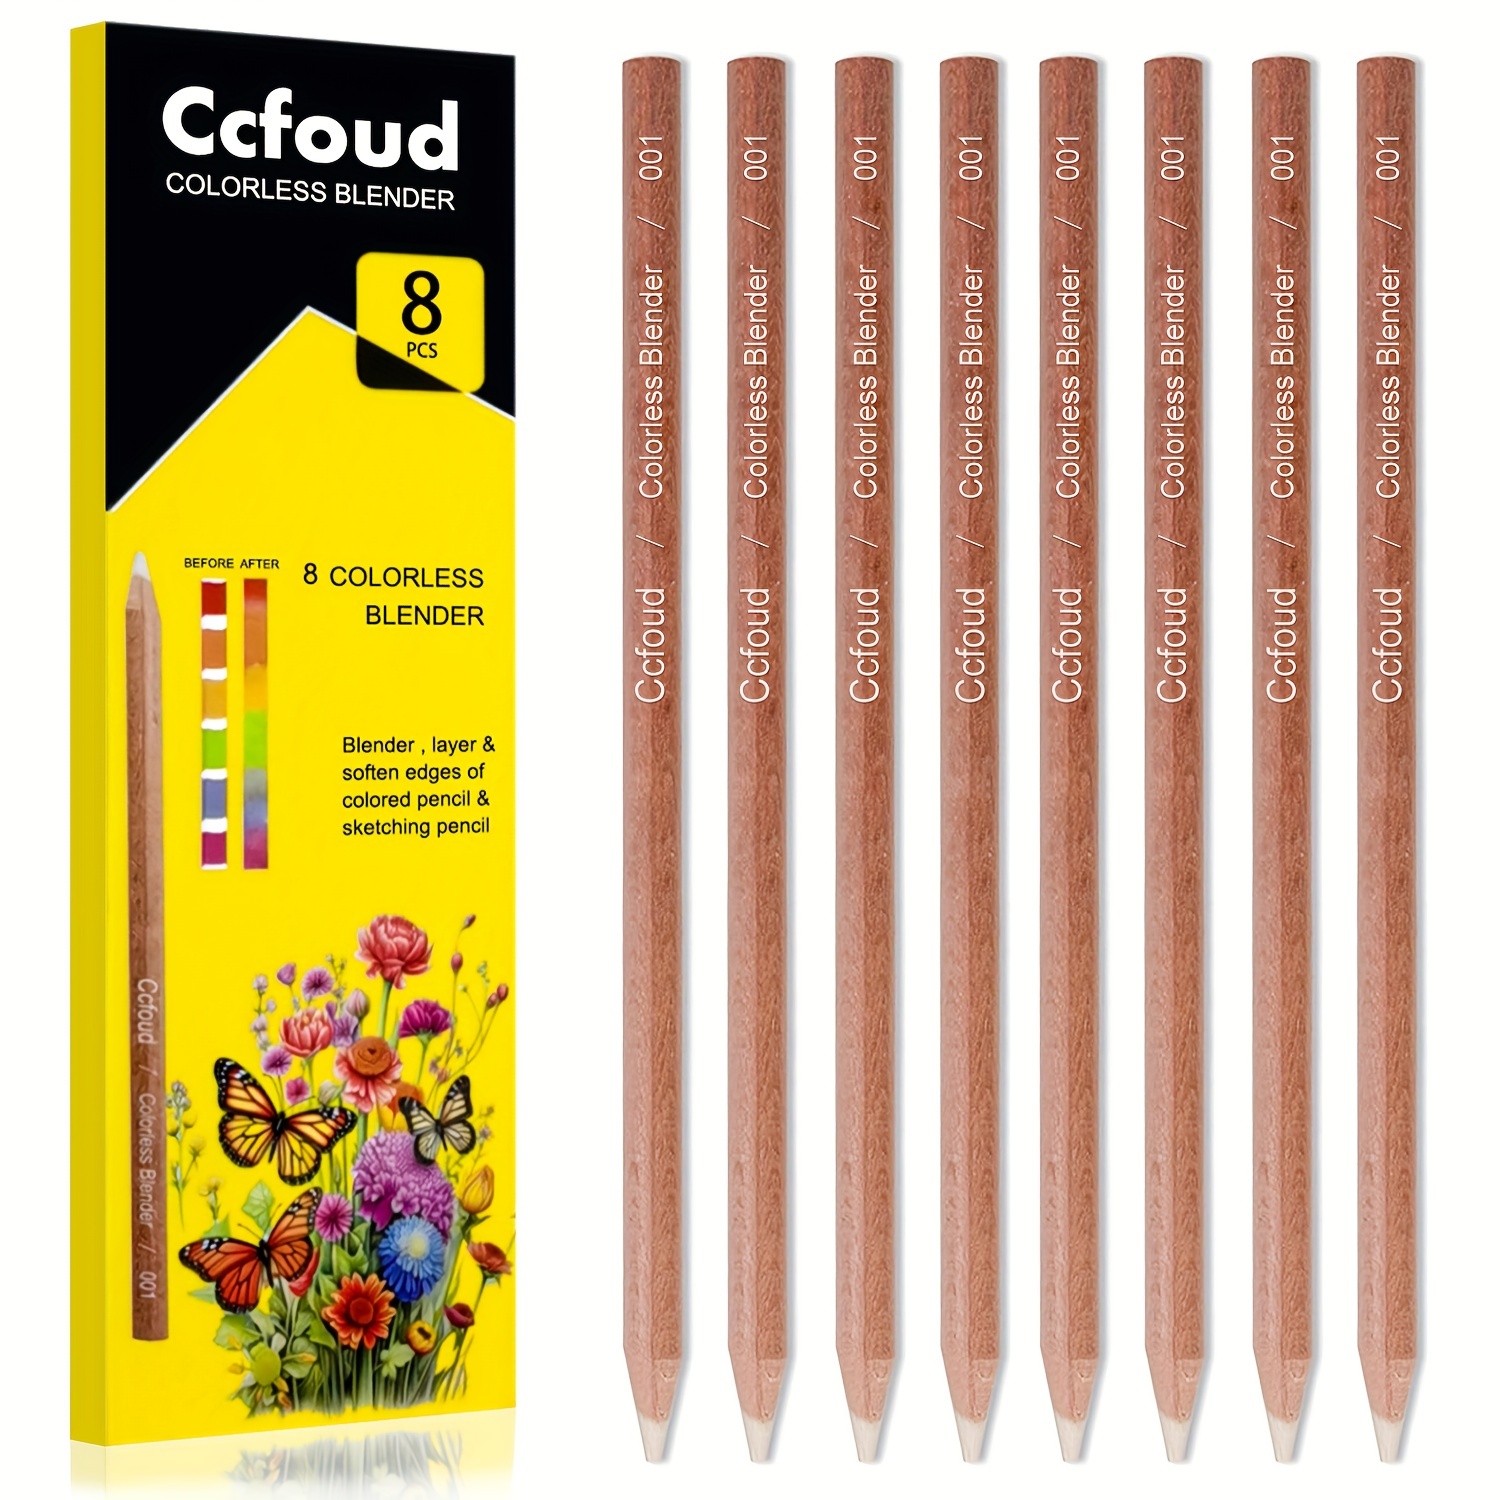 

precision Crafting" Ccfoud 8-piece Blending & Burnishing Pencil Set - Pre-sharpened, Wax-based For Soft Edges, Ideal For Colored Pencils - Art Supplies For Beginners